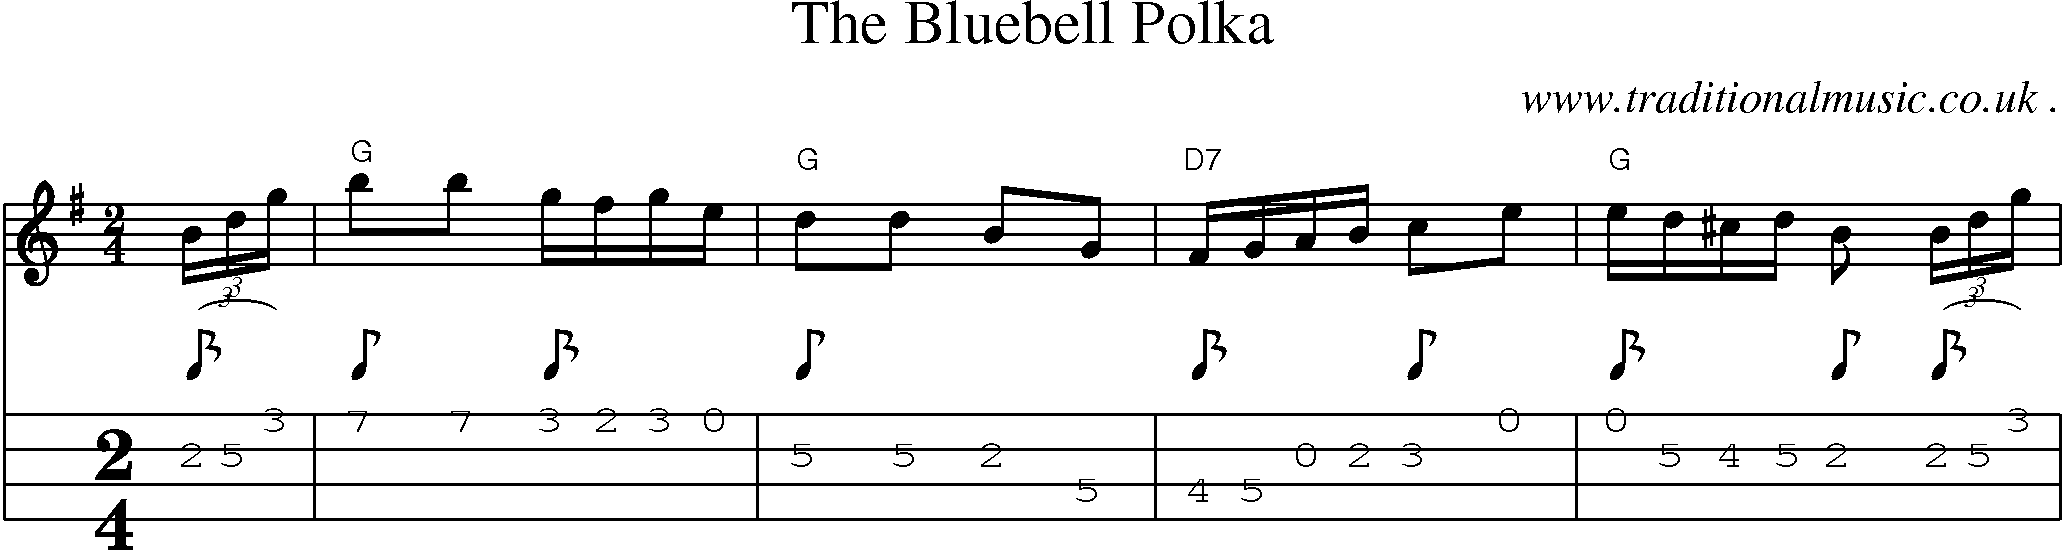 Sheet-music  score, Chords and Mandolin Tabs for The Bluebell Polka